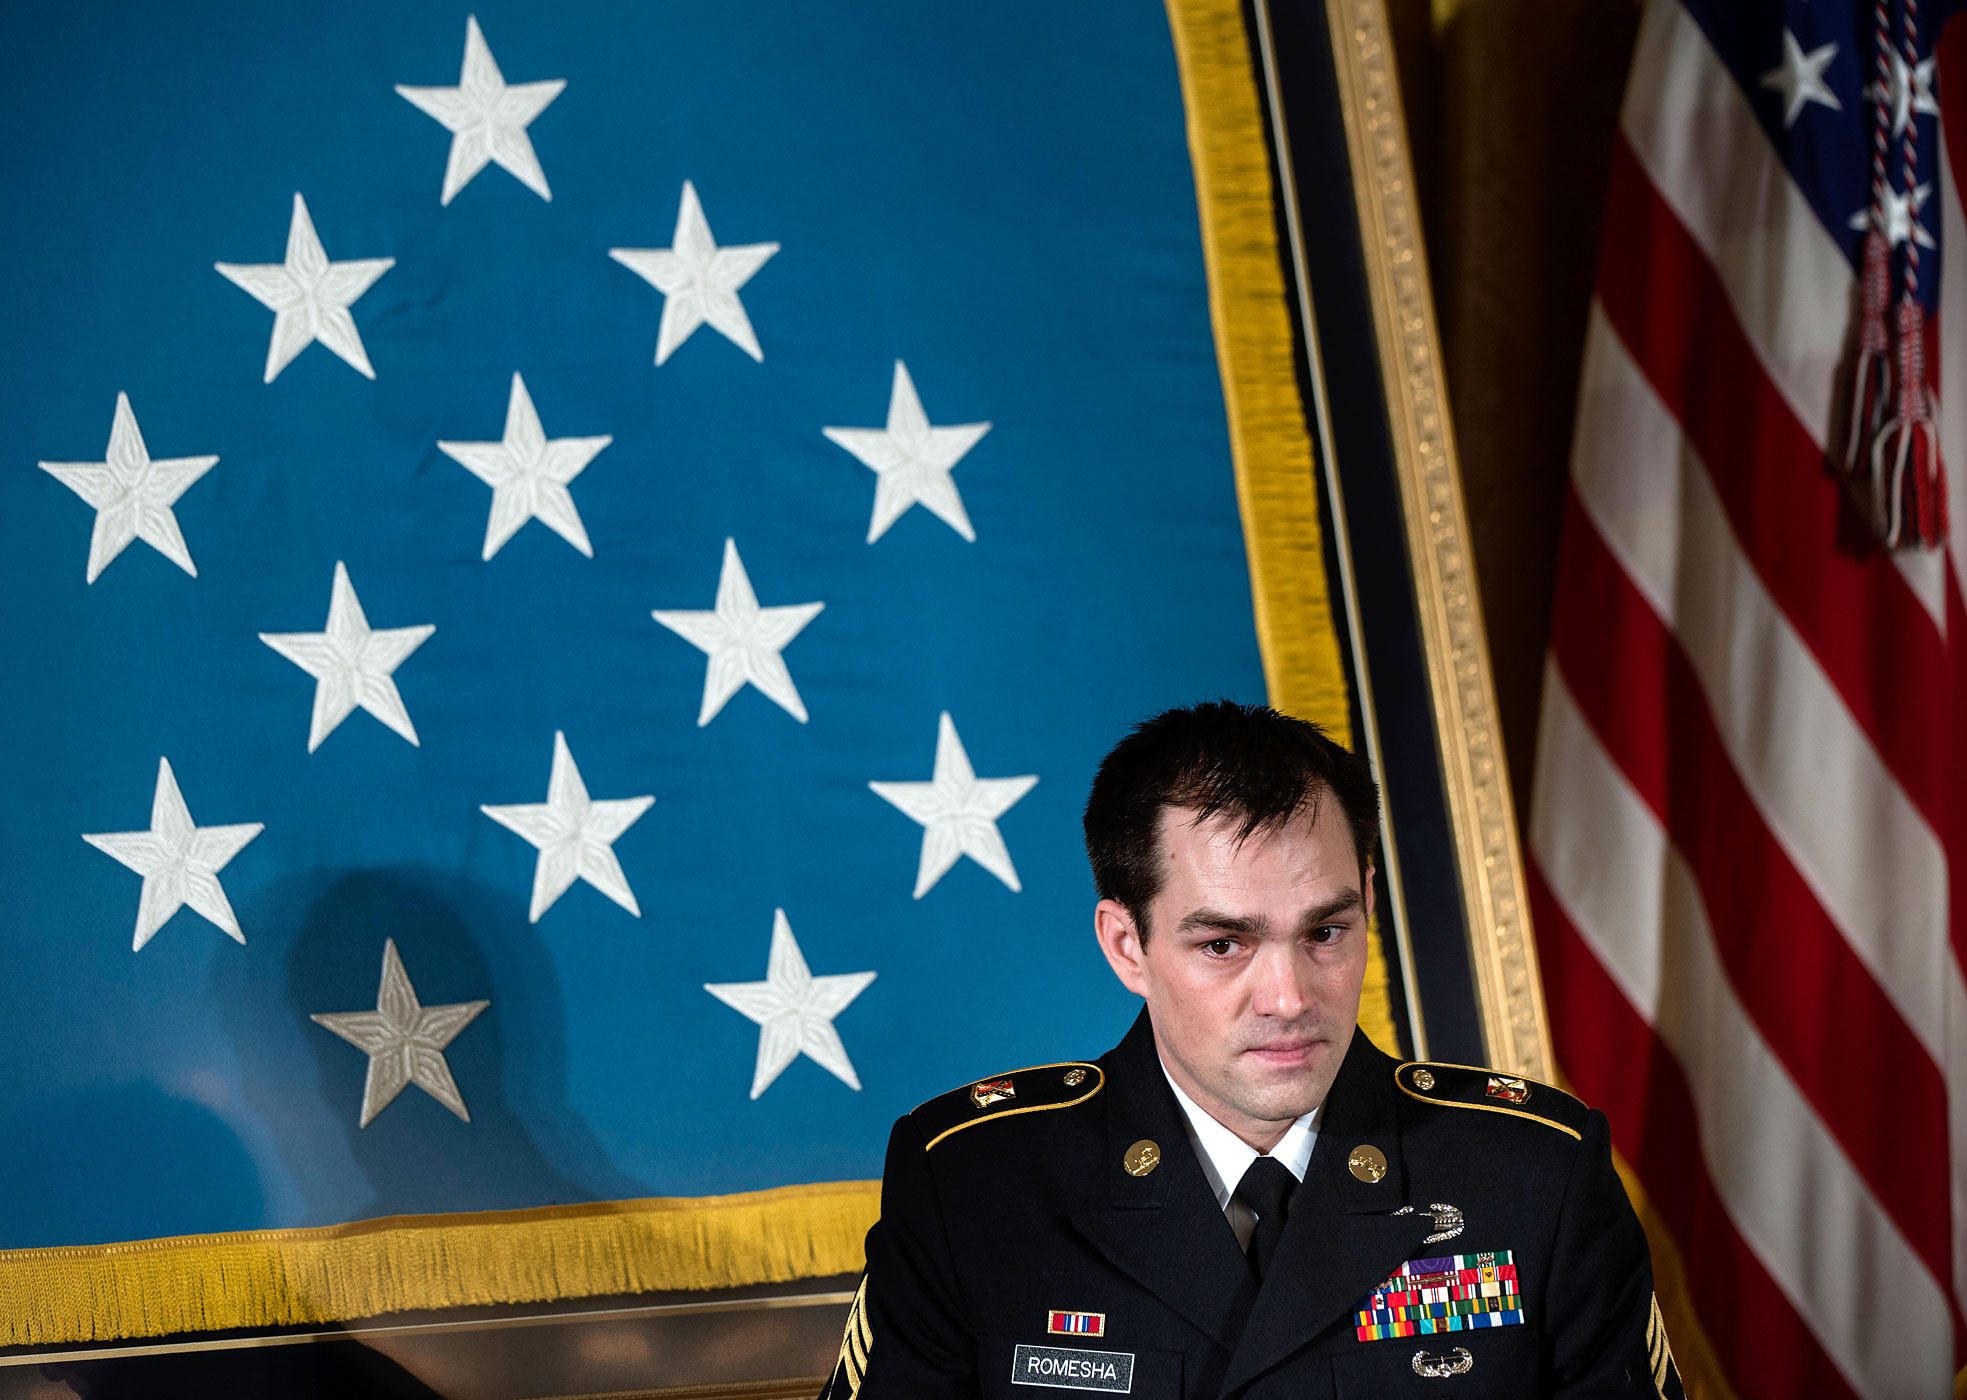 Feb. 11, 2013. Army Staff Sargent Clinton Romesha listens during a Medal of Honor ceremony in the East Room of the White House in Washington. Romesha was awarded for his service during an insurgent attack on Combat Outpost Keating in Afghanistan.